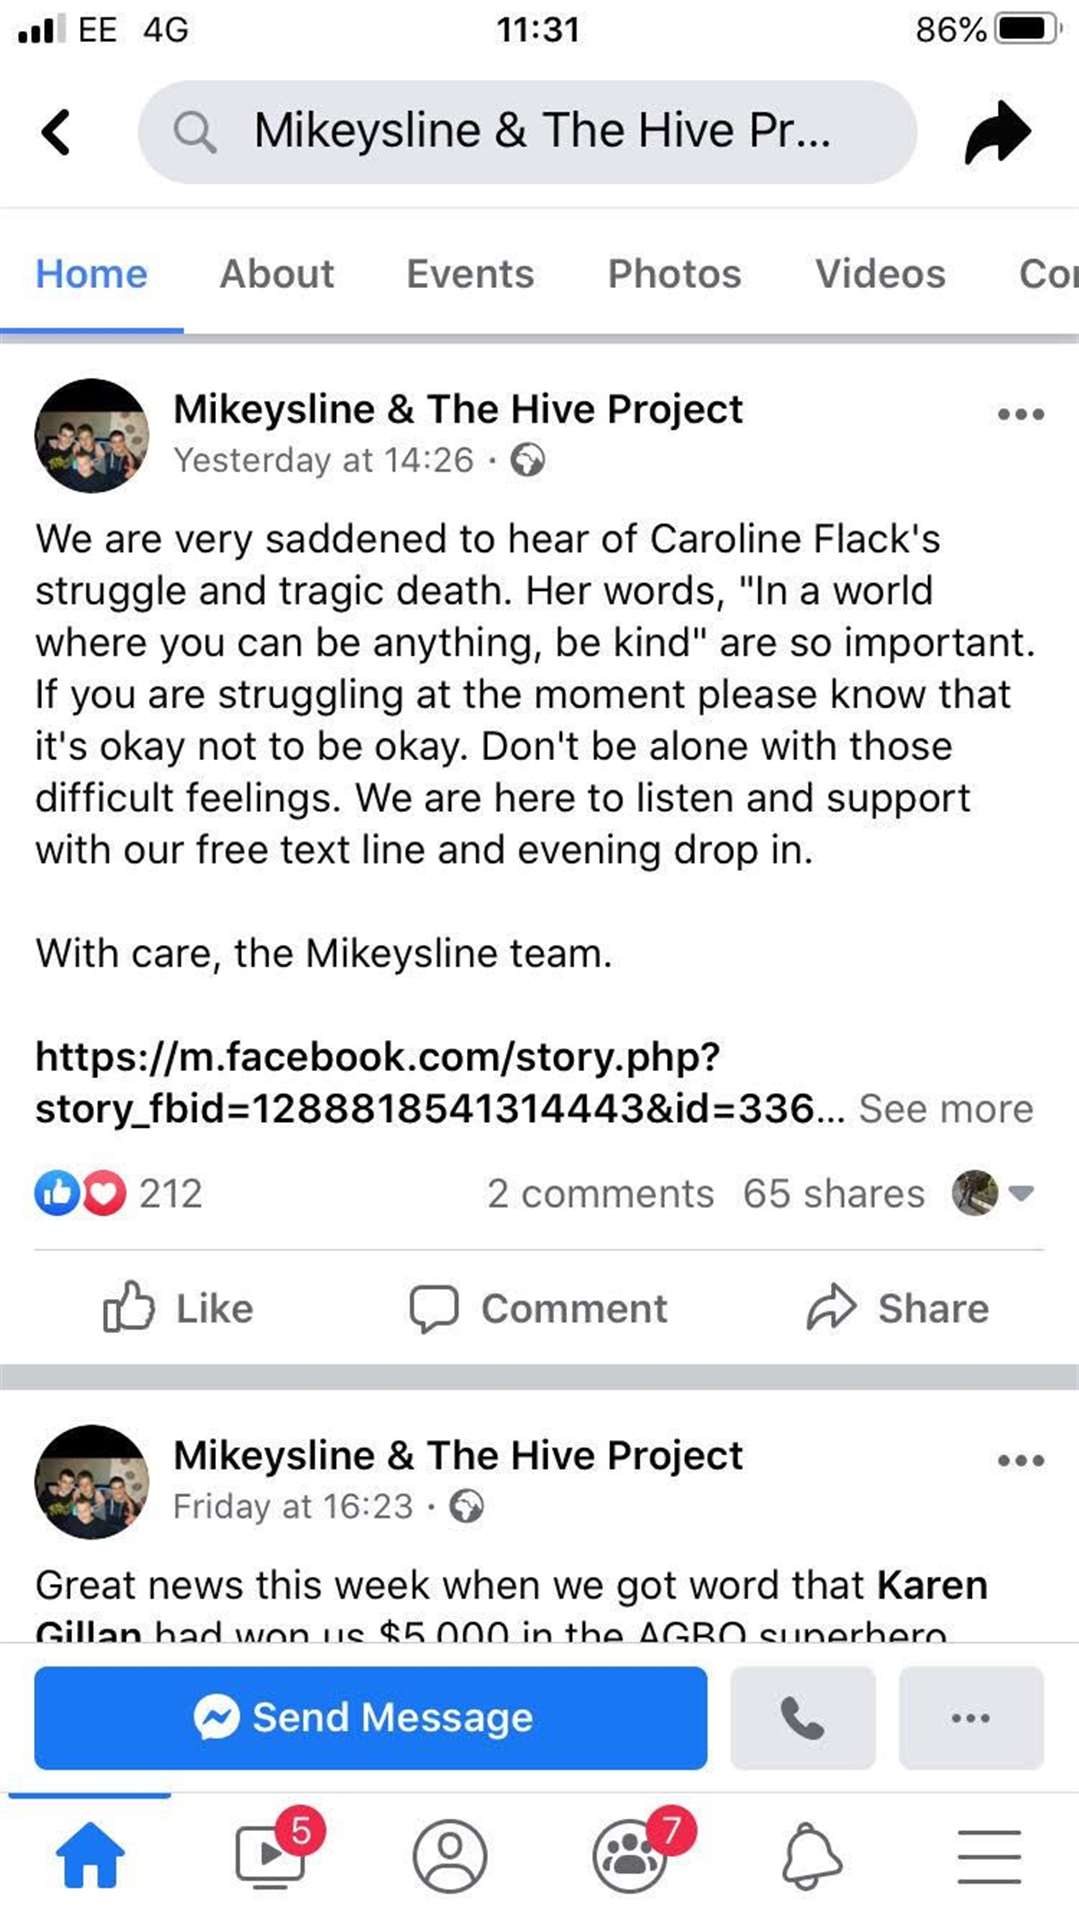 The Facebook post from Mikeysline.